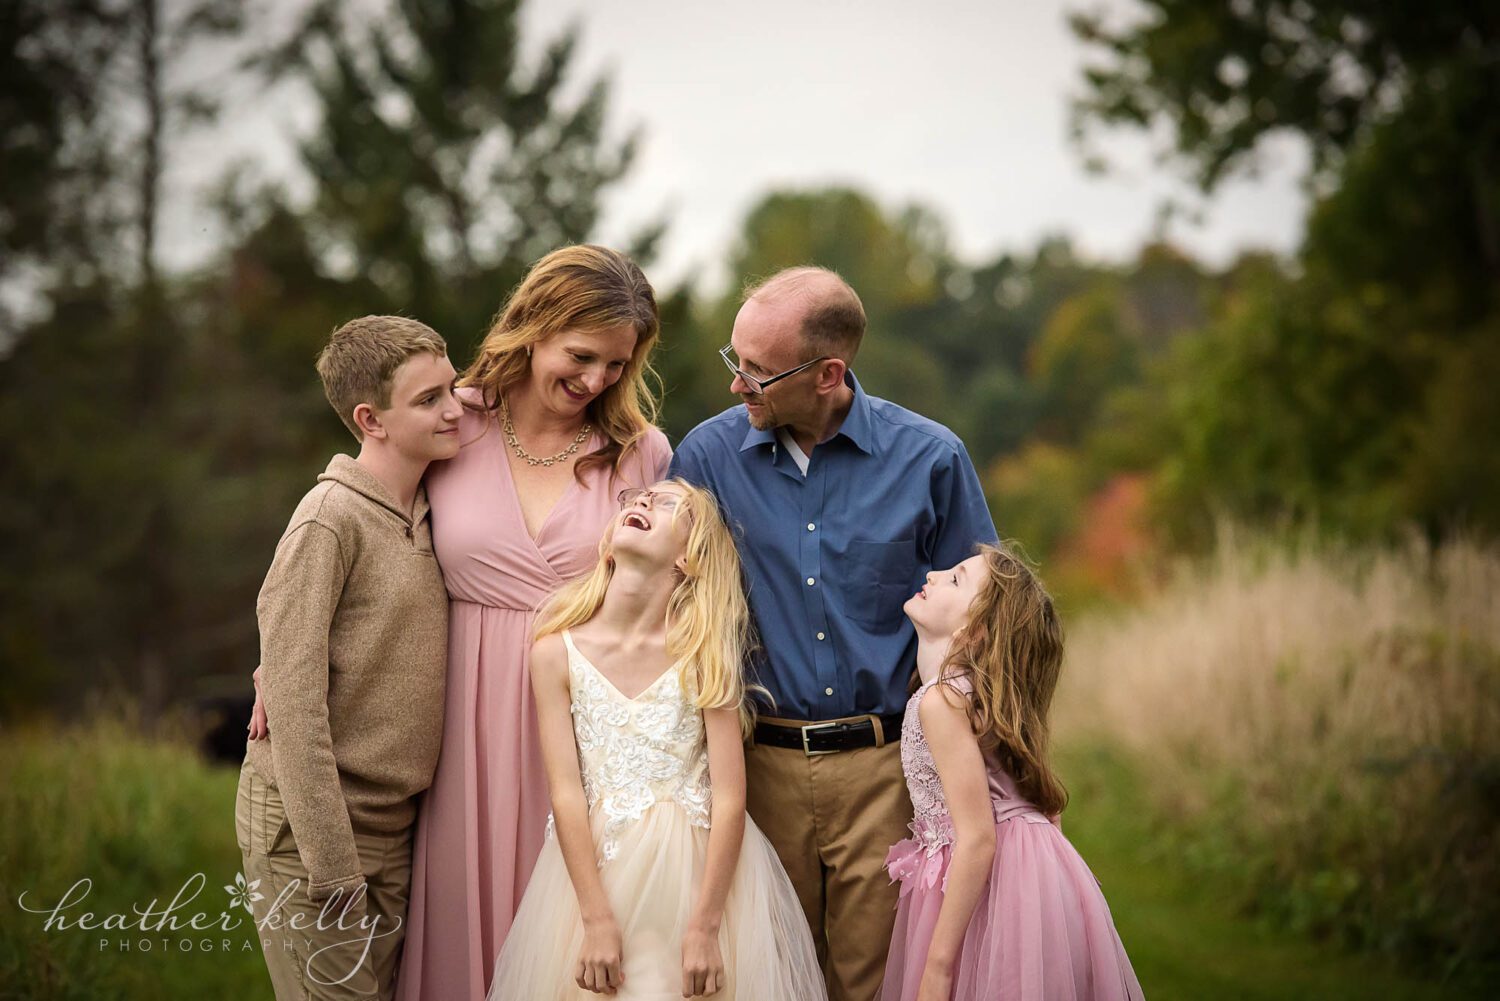 newtown area family photography. Family of 5 in a field all looking at each other lovingly. 